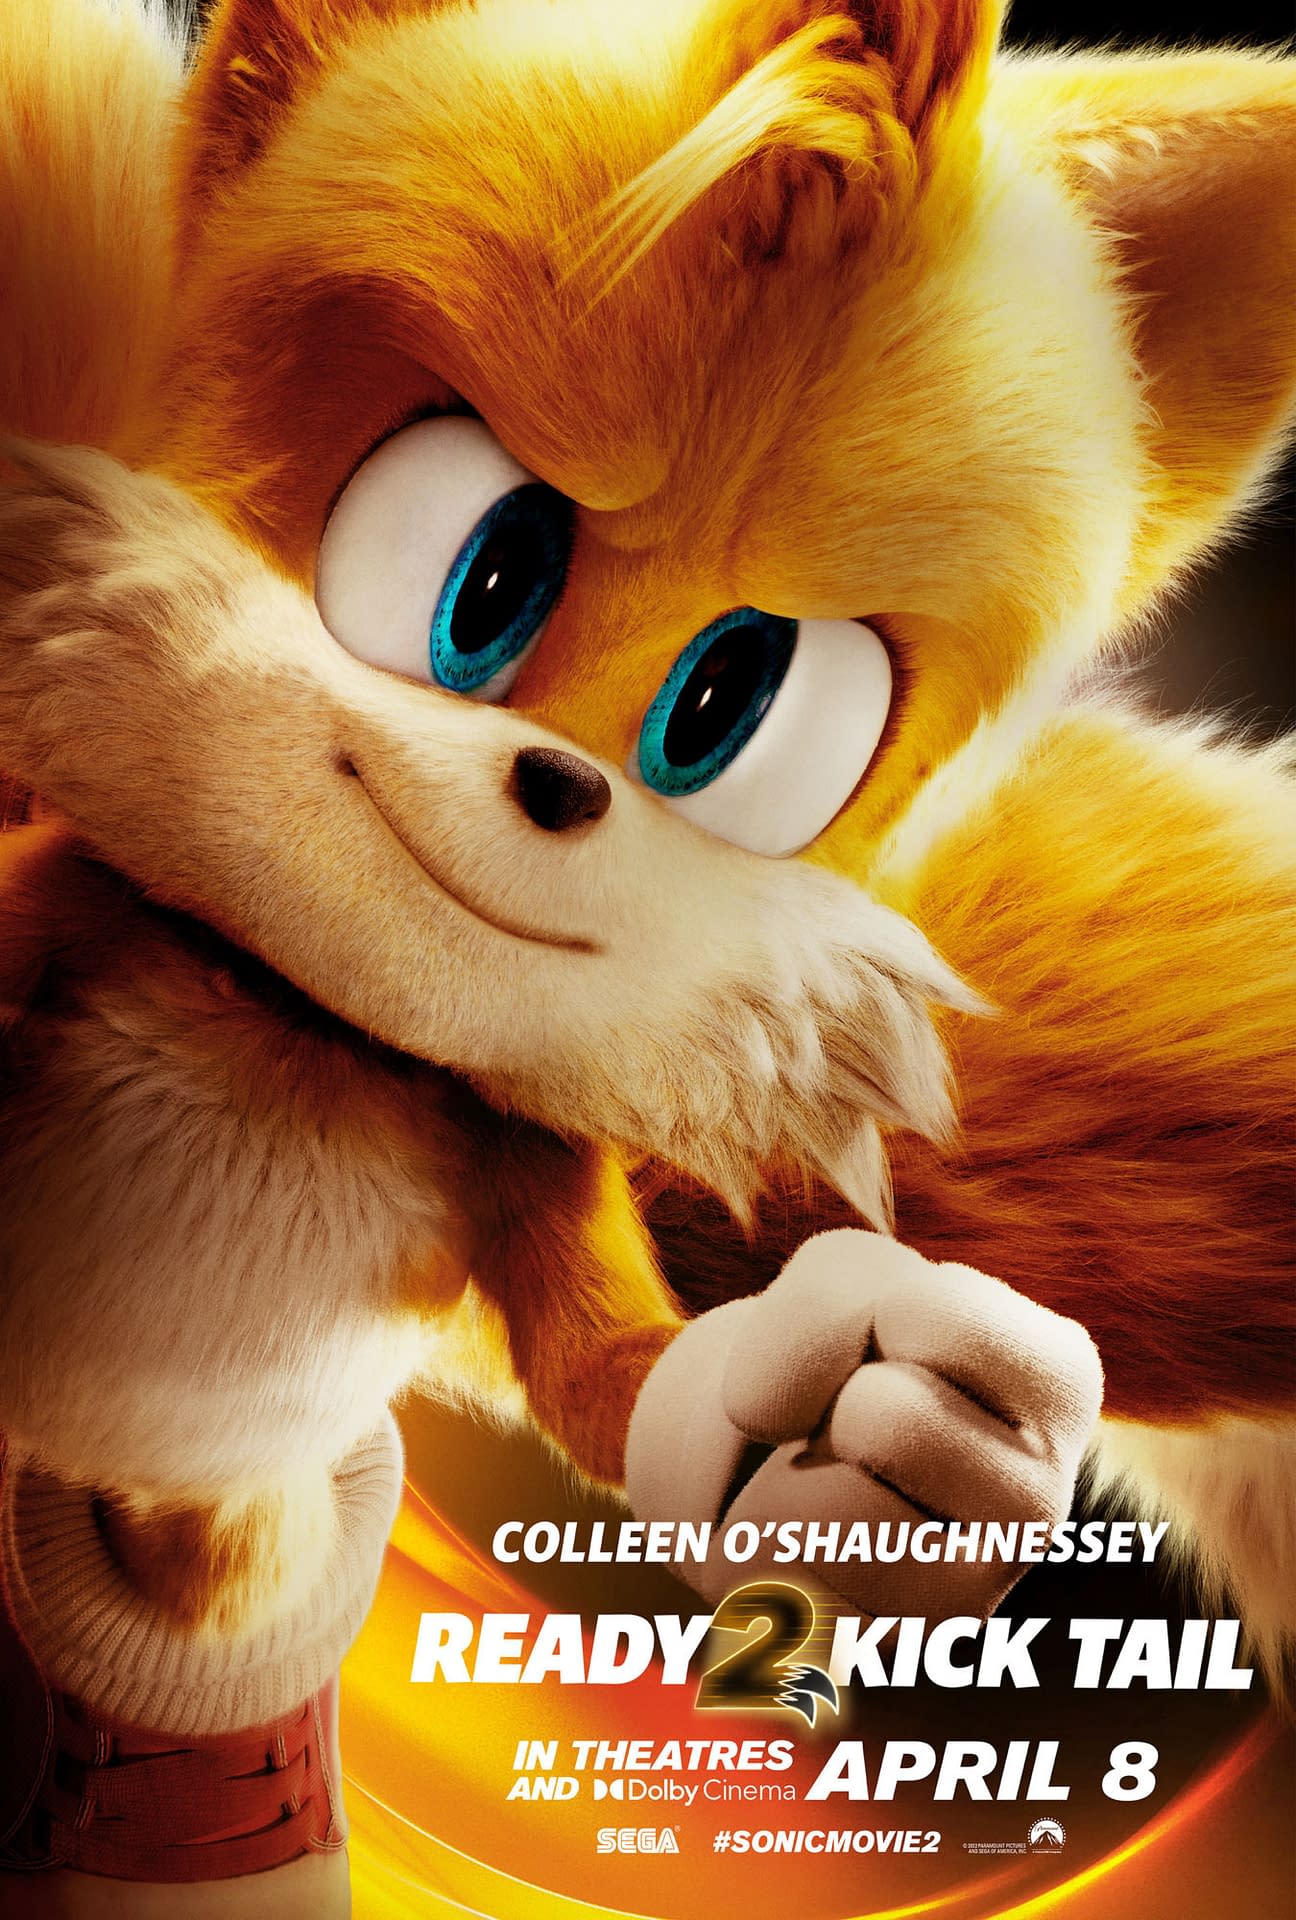 Sonic the Hedgehog 2 gets nine new character posters